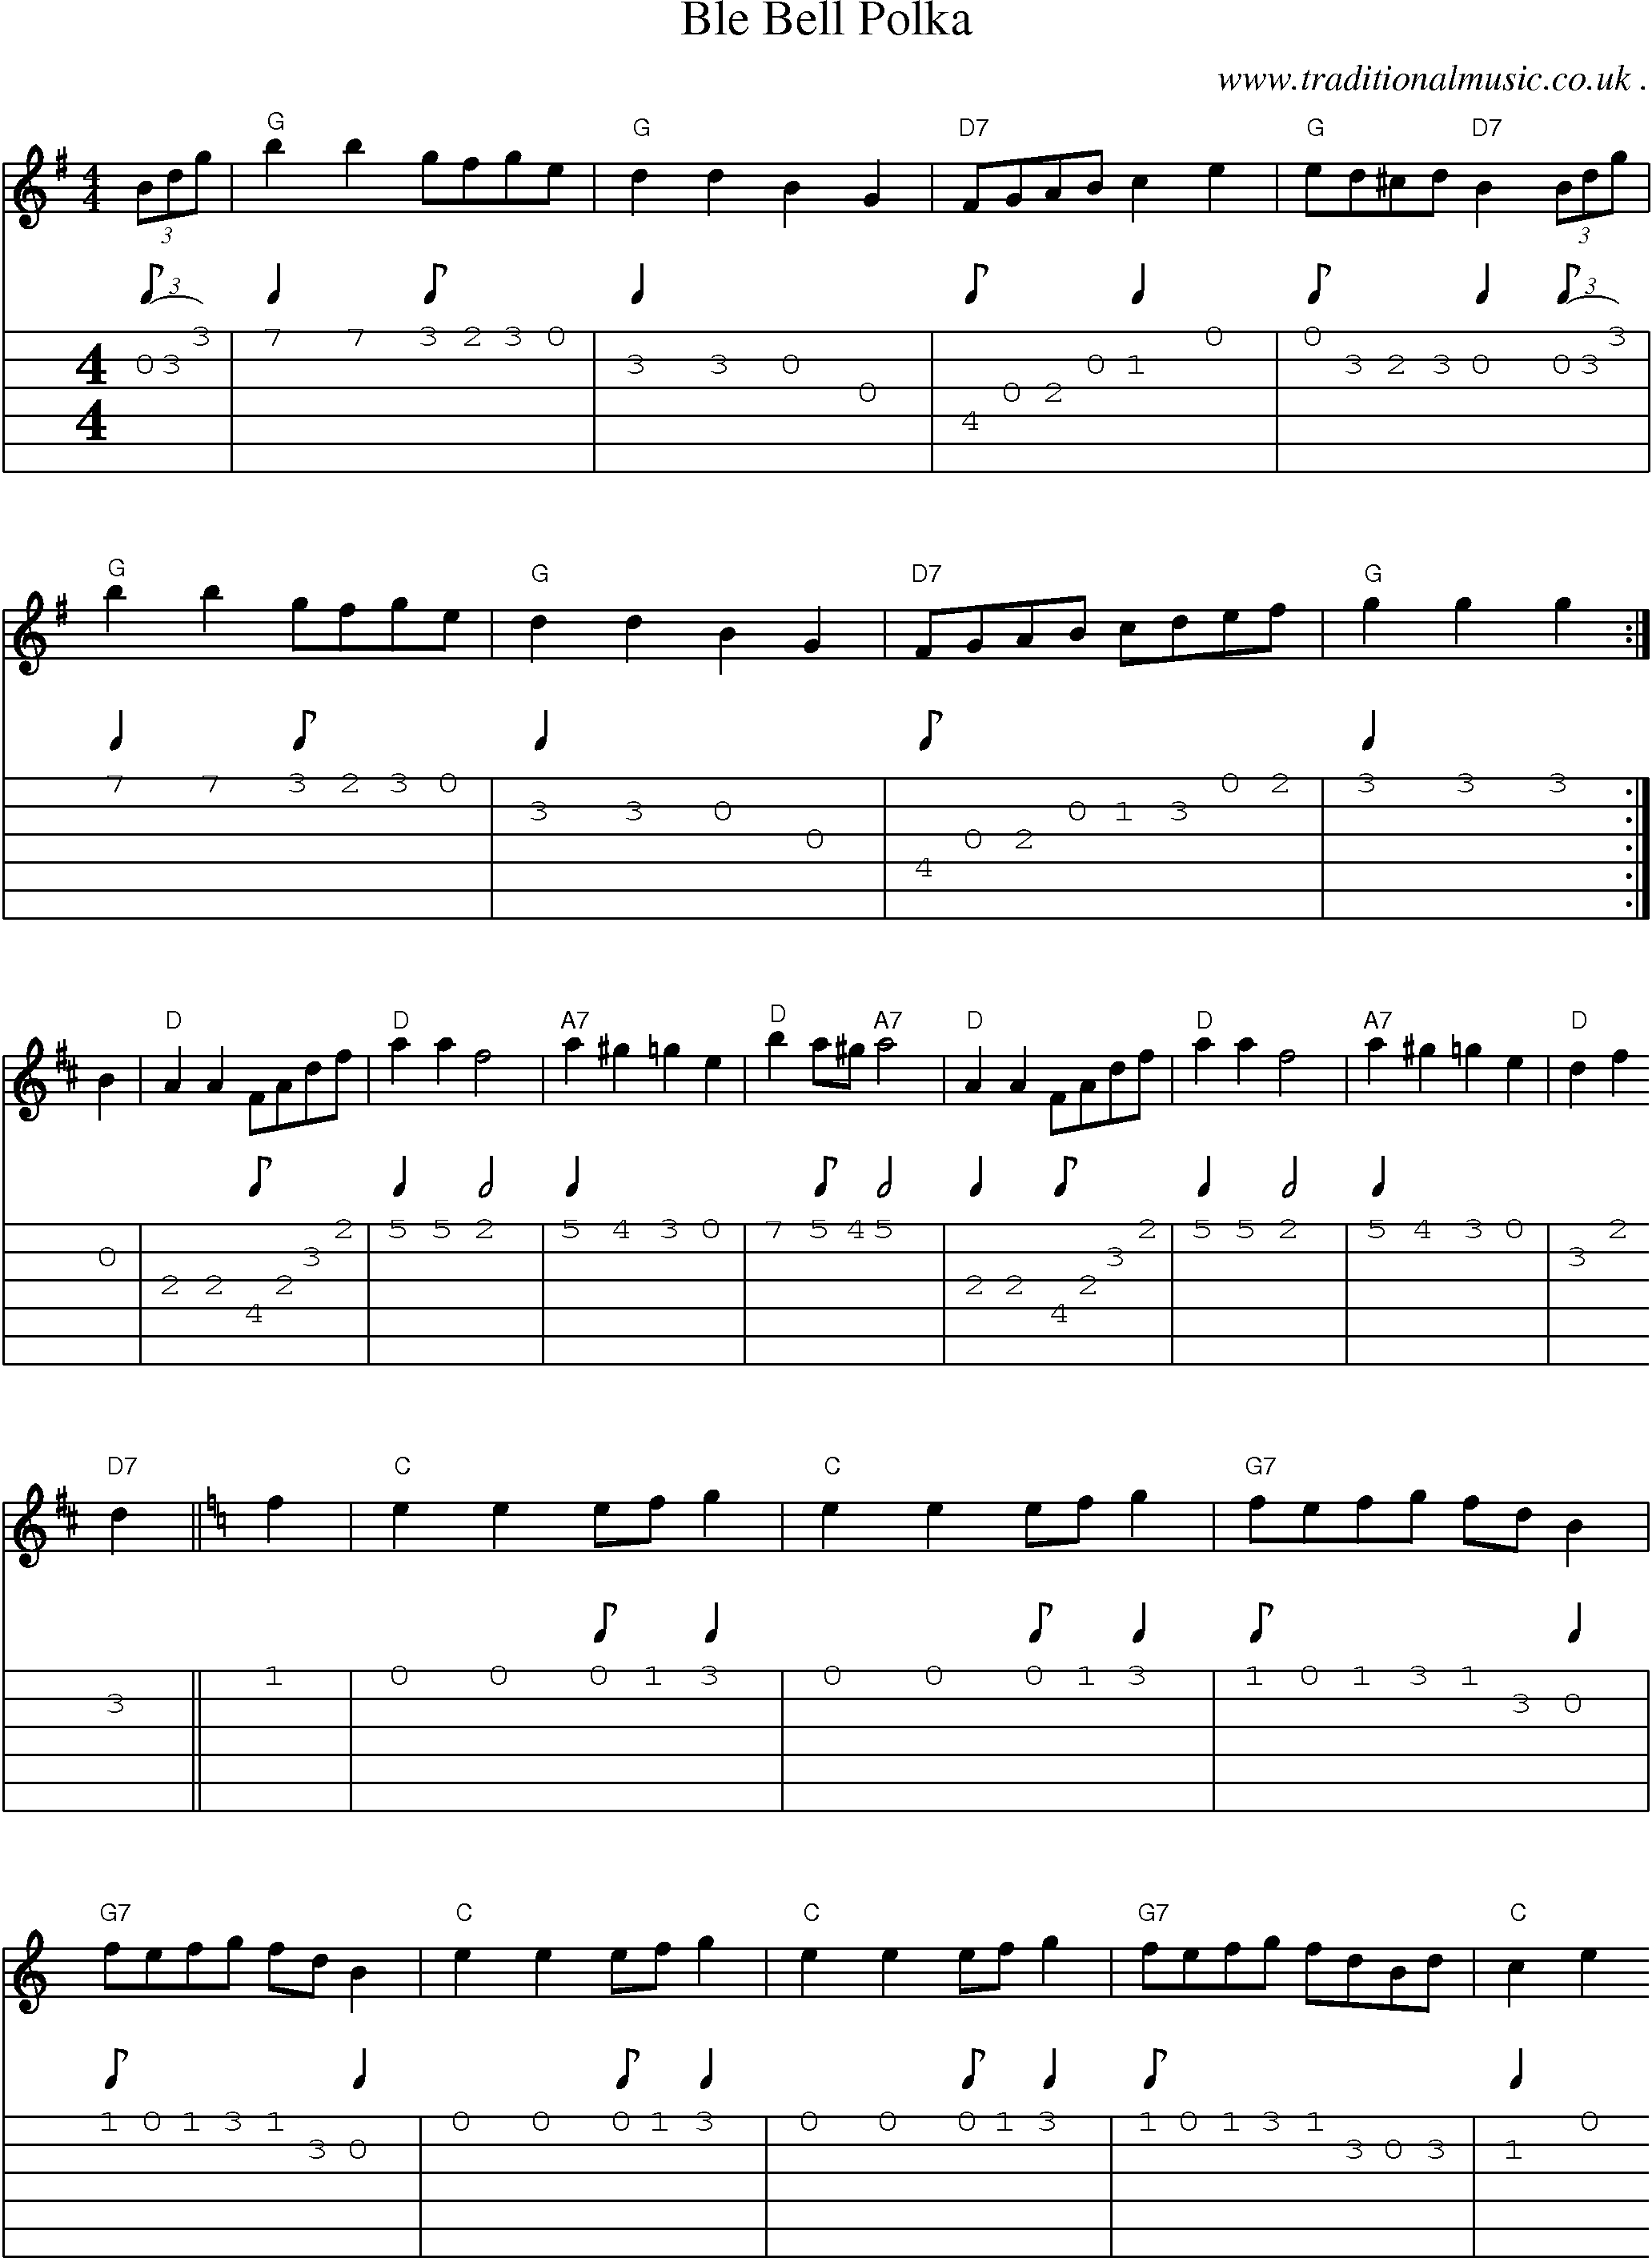 Sheet-Music and Guitar Tabs for Ble Bell Polka